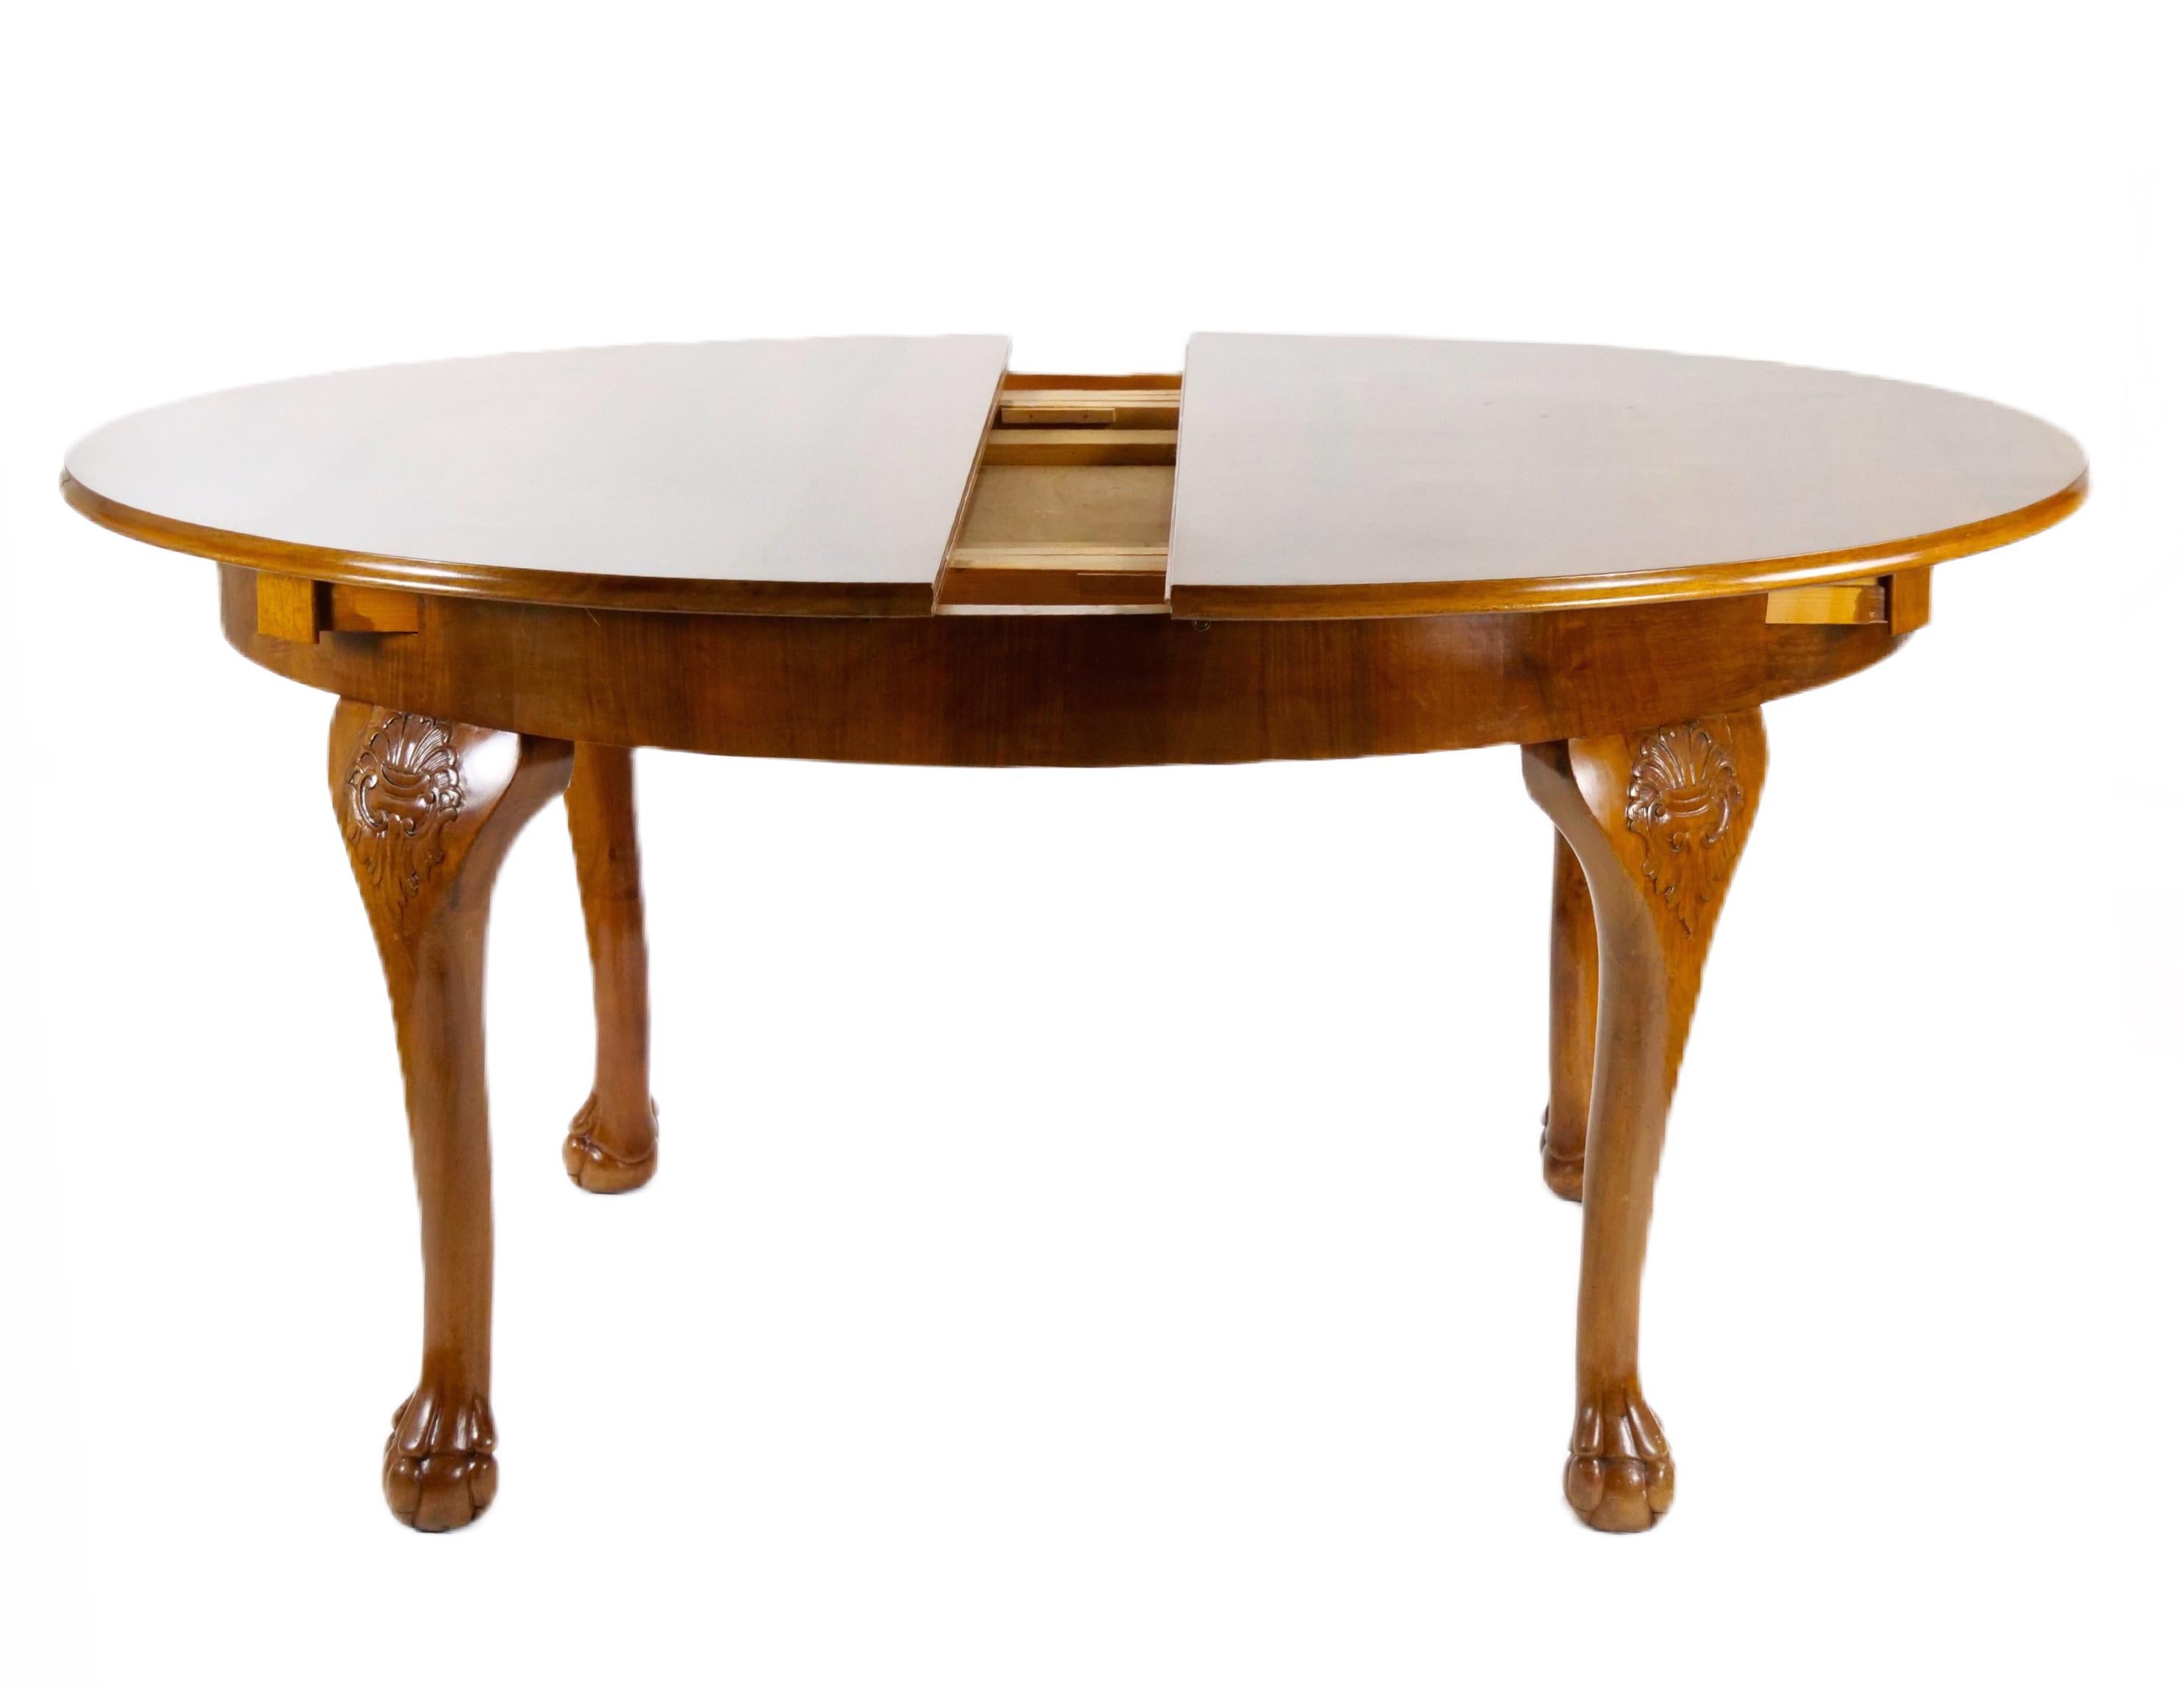 Early 20th Century Italian Hand Carved Walnut Neoclassical Style Dining Table For Sale 1